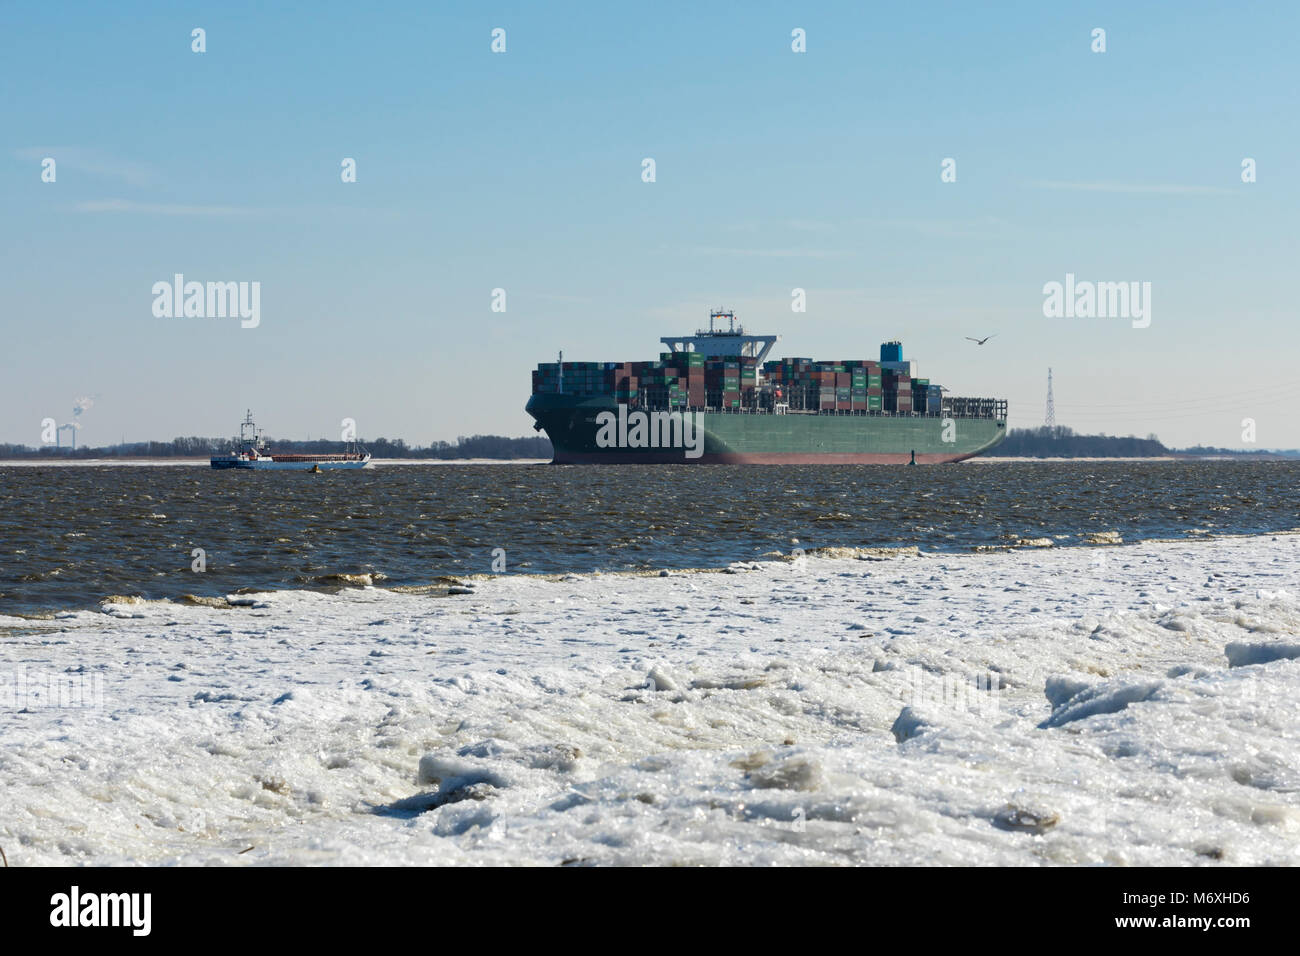 Stade, Germany - March 1, 2018: Container ship TOLEDO TRIUMPH on Elbe river. It is 365 meters long and holds up to 13870 standard containers. Stock Photo